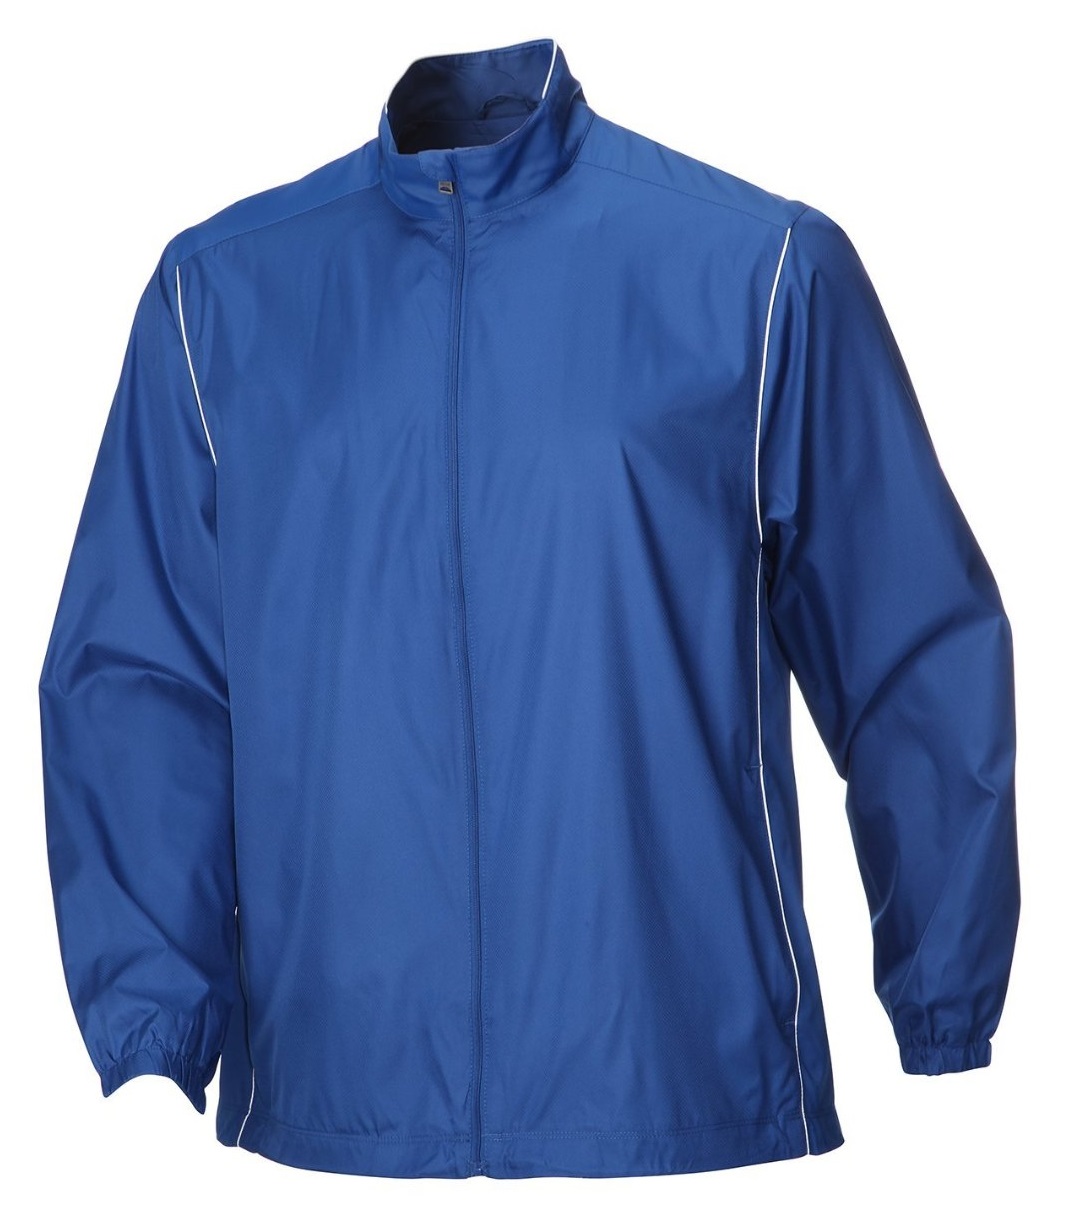 Mens Greg Norman Water Resistant Performance Golf Jackets